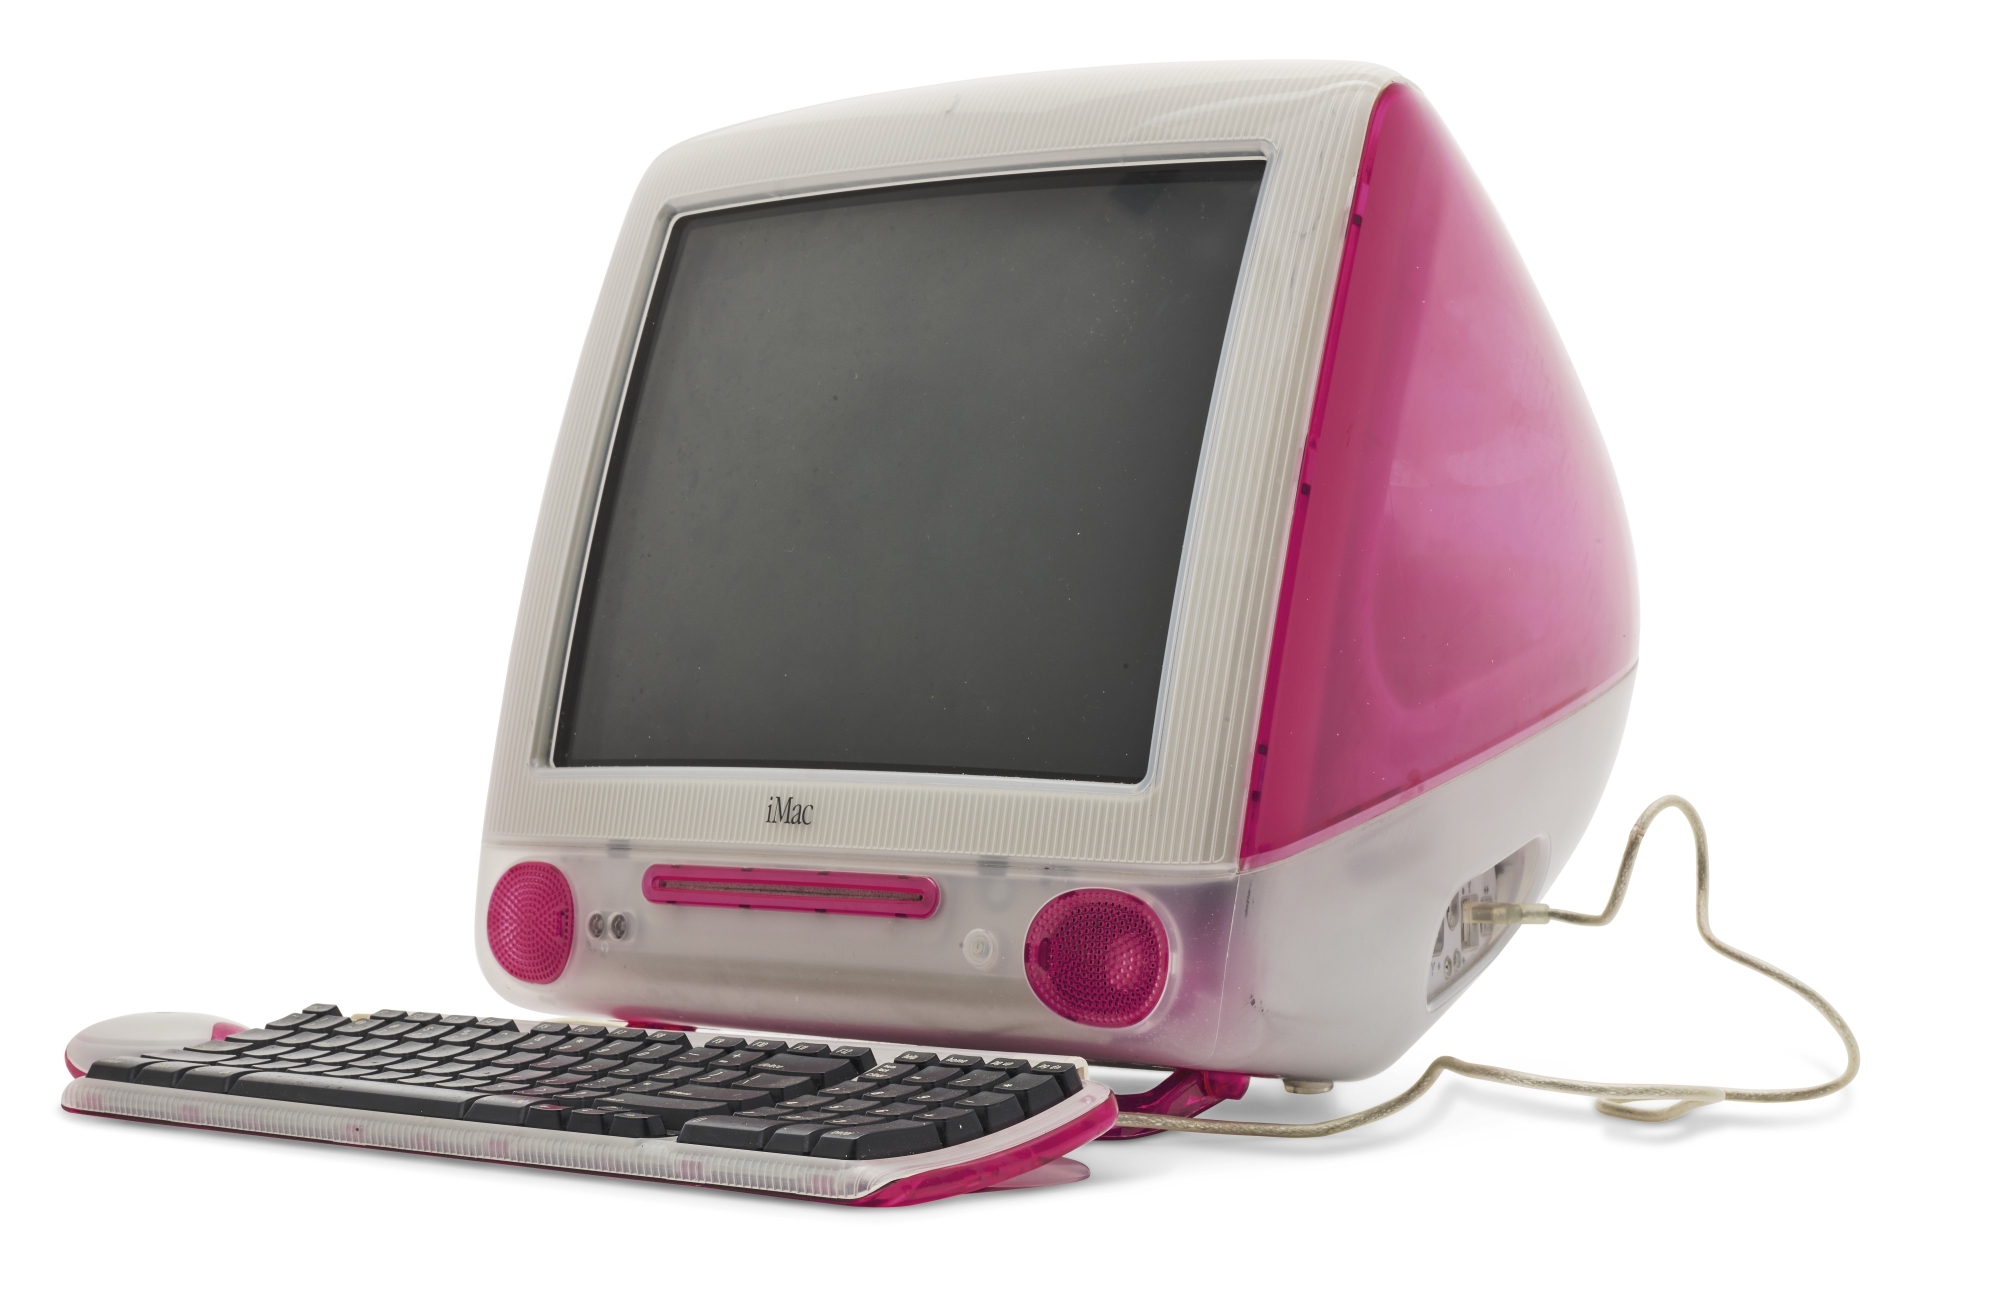 Christie’s Sells NFT and iMac Computer Used to Create Wikipedia for $937,500